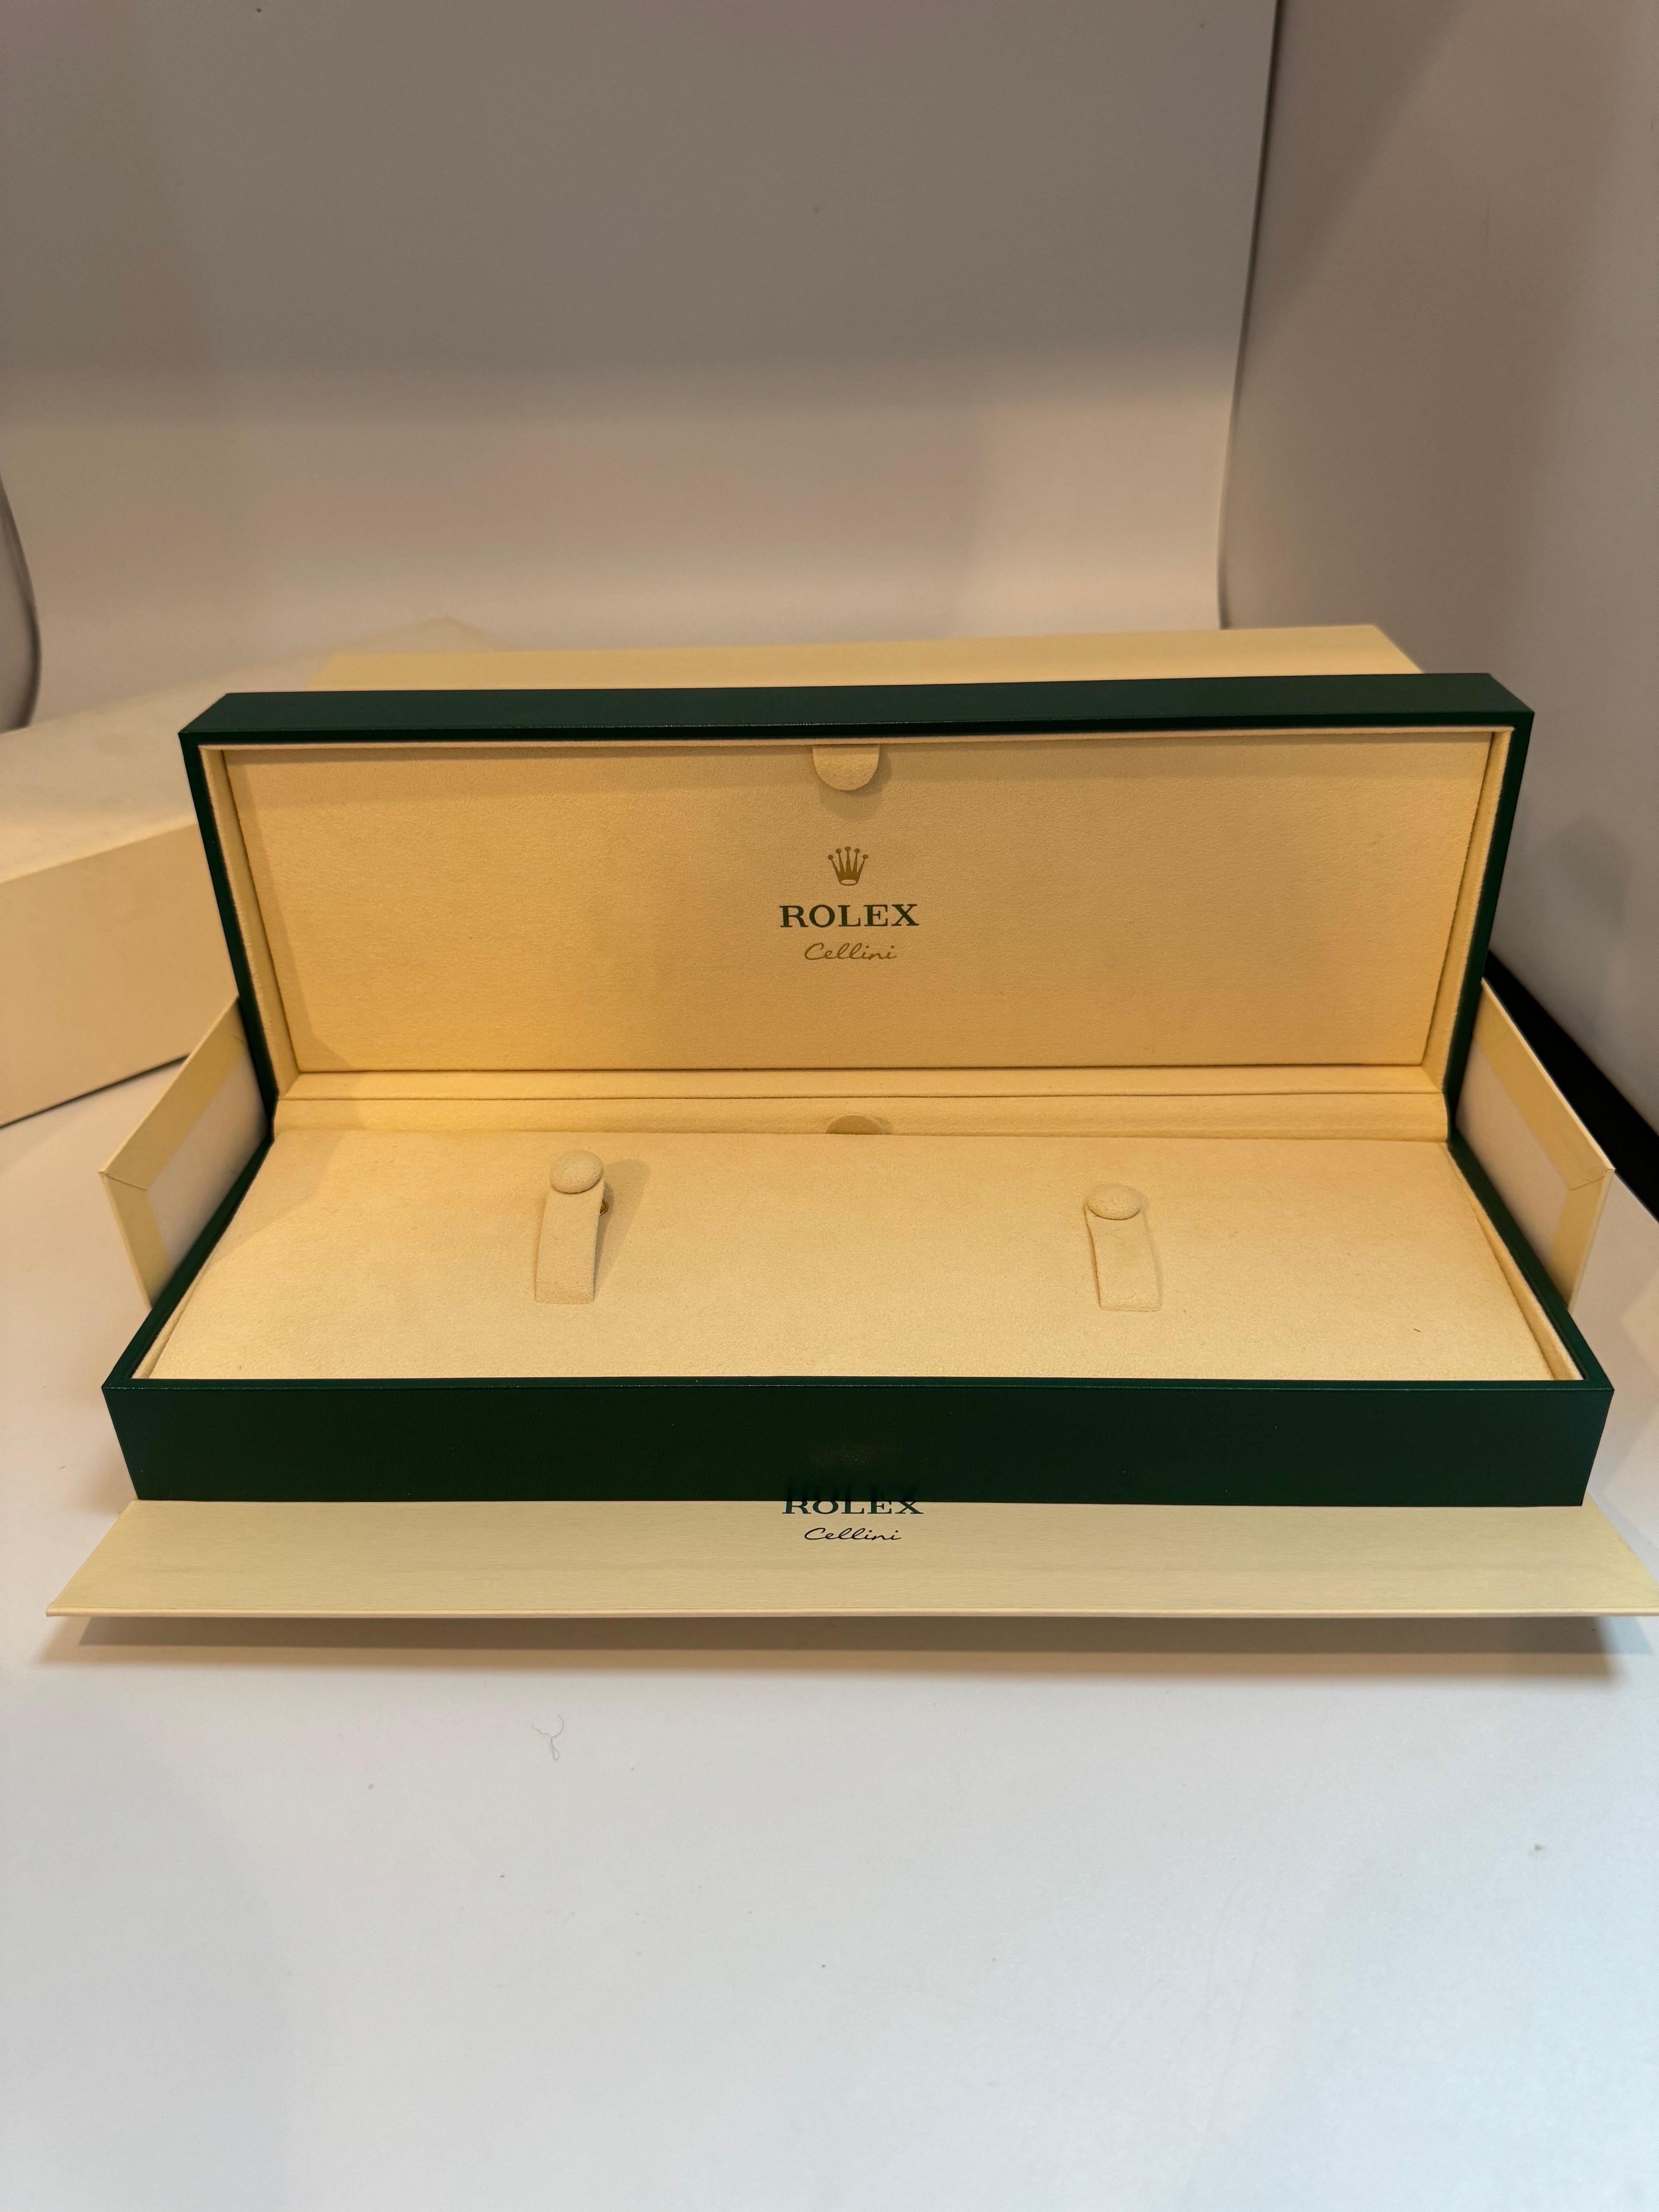 ROLEX watch case box CELLINI 
Brand New Watch BOX 
 Rolex was  purchased from show room in Manhattan 
 Watch was used for personal use and i am selling the box

Large Brand New Rolex Box
Complete and new Rolex box.

Large size 32CMX12CMX7CM
Rolex